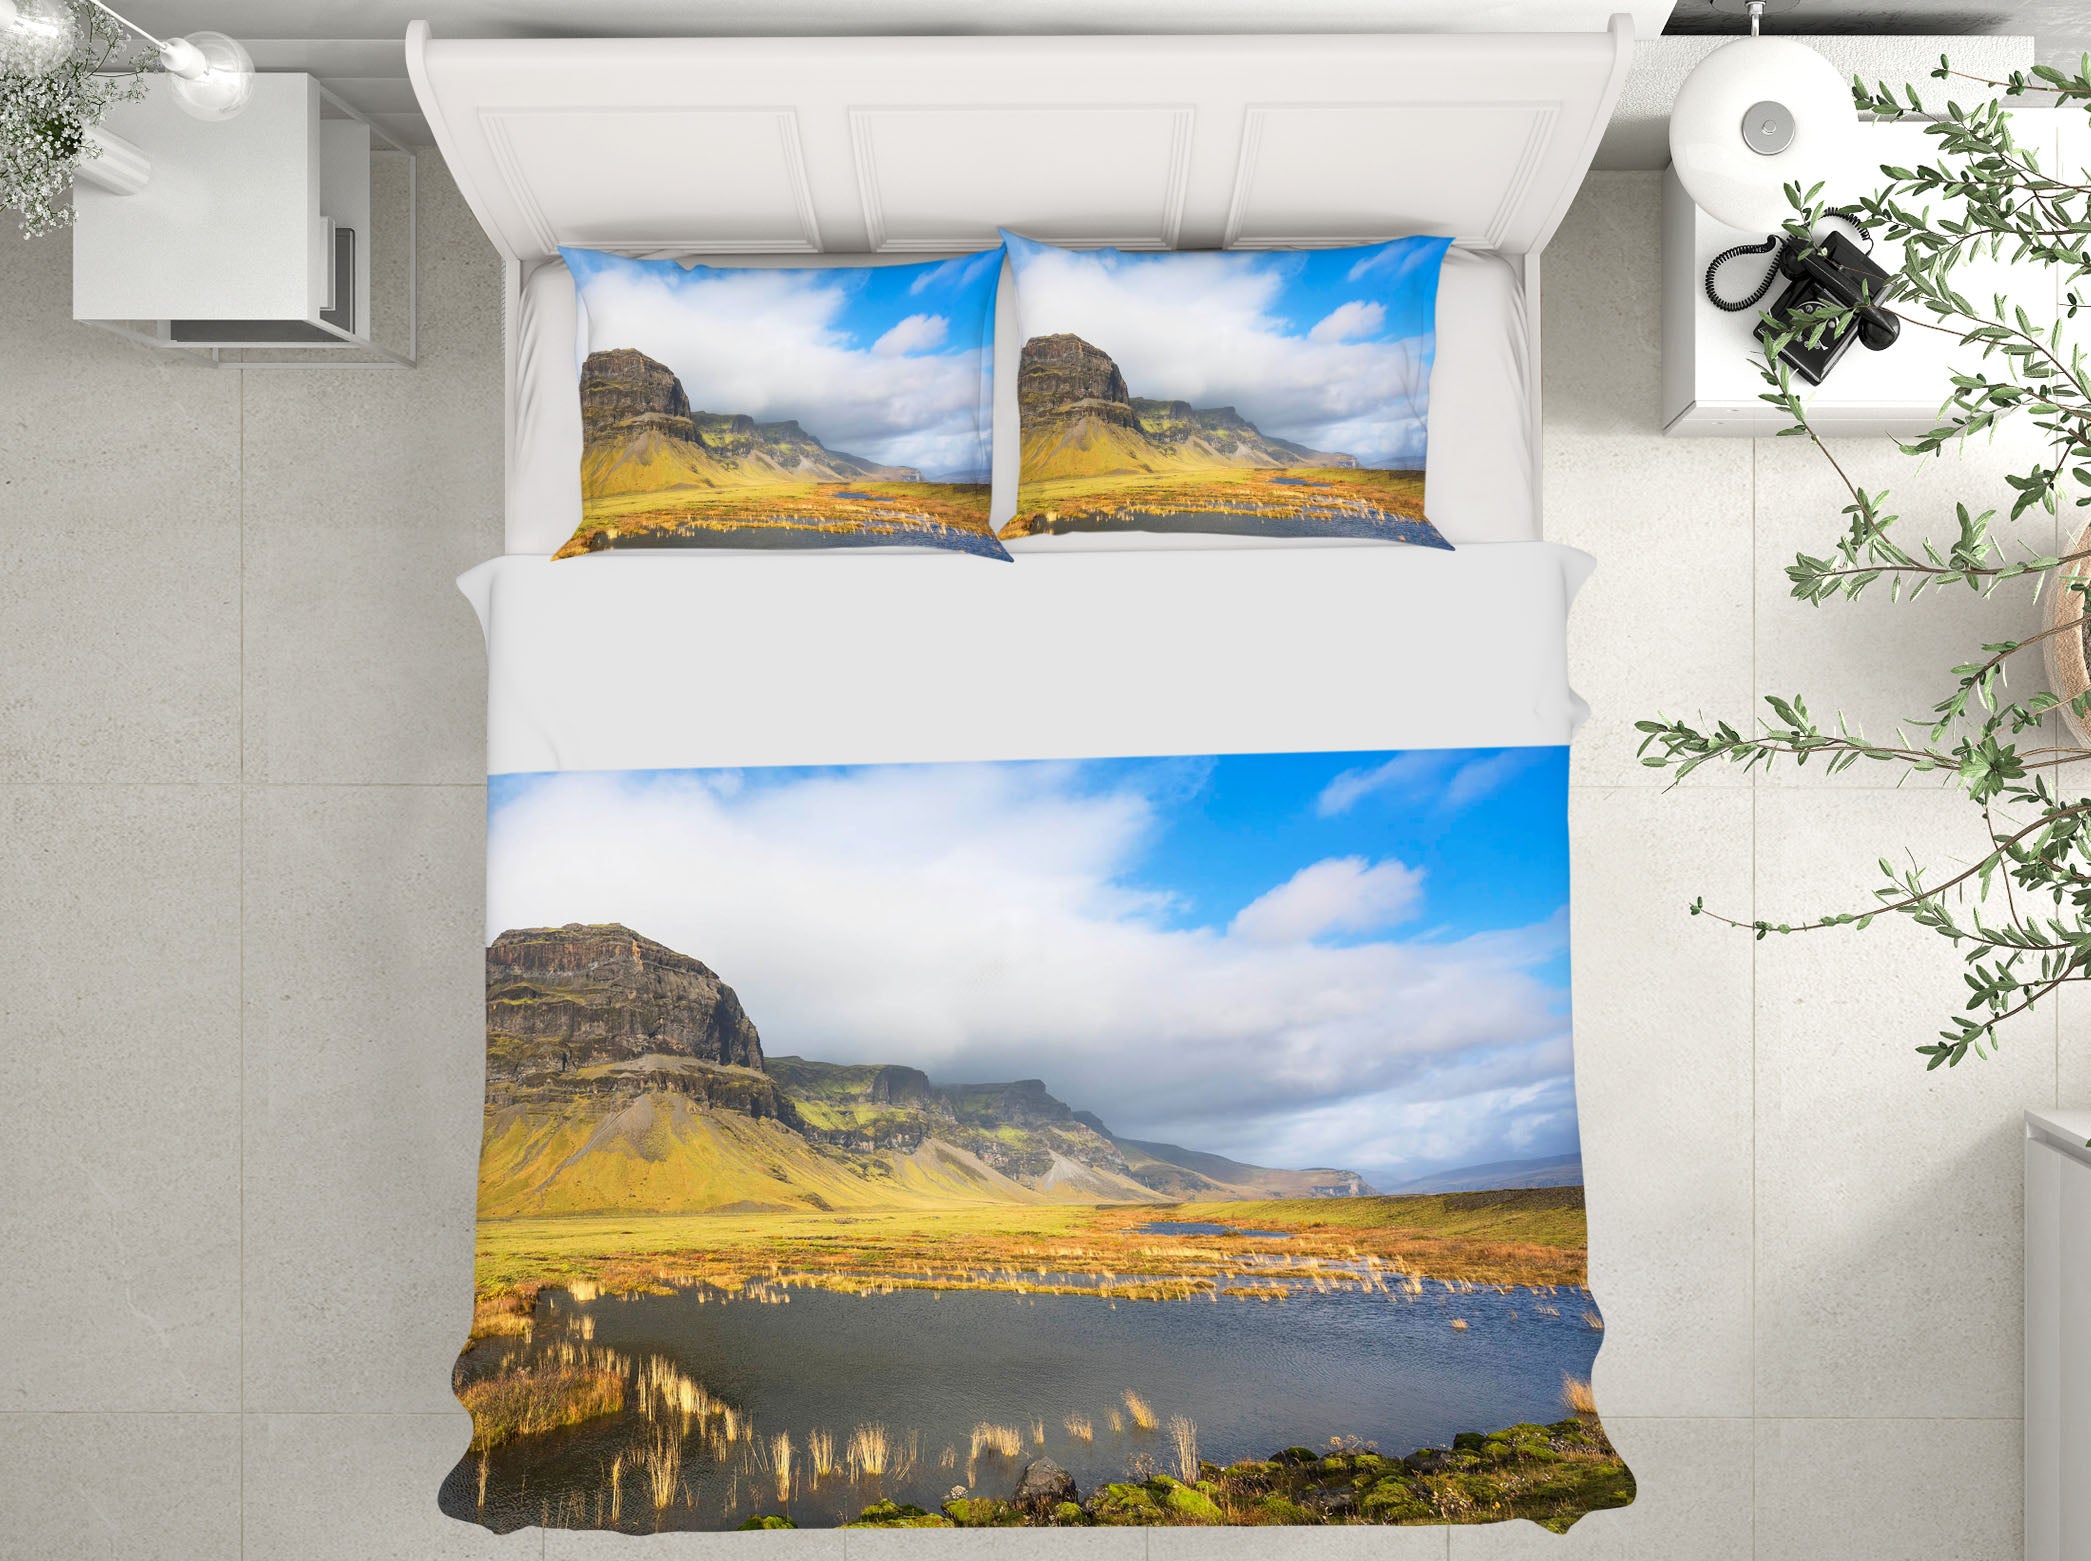 3D Mountain River 069 Marco Carmassi Bedding Bed Pillowcases Quilt